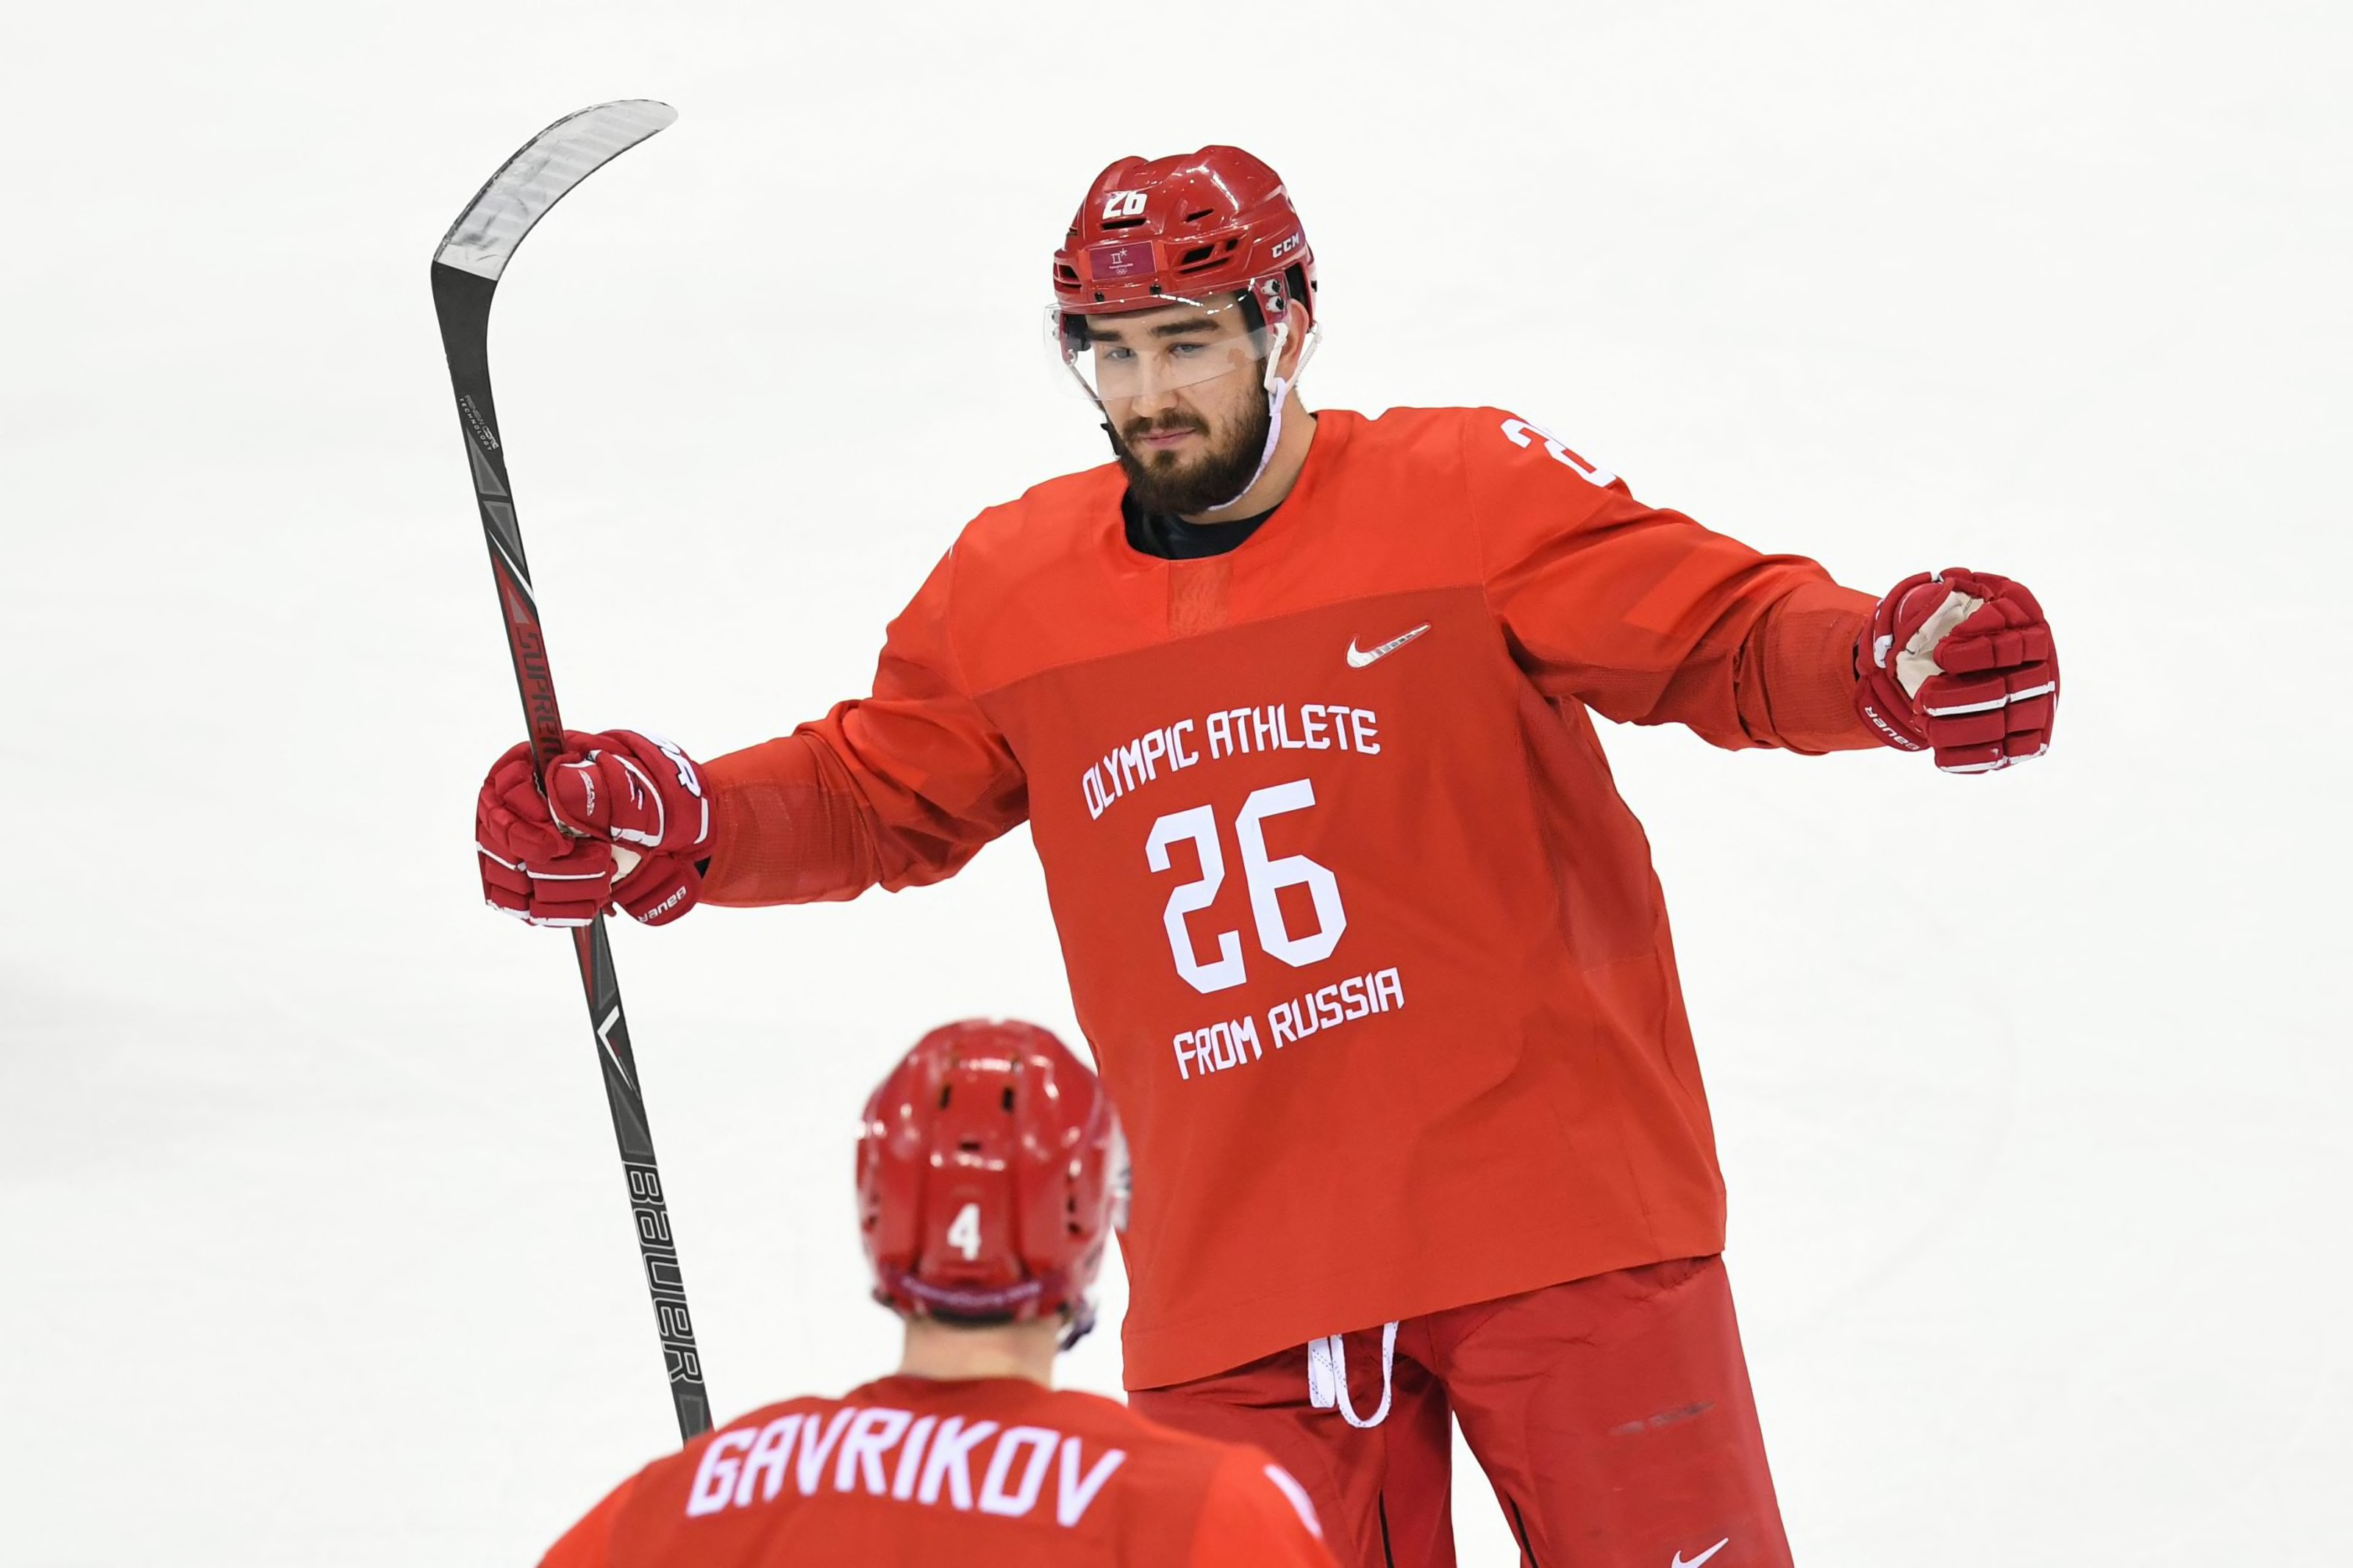 Slava Voynov returning to Russia, leaving Kings following domestic violence  charges – New York Daily News